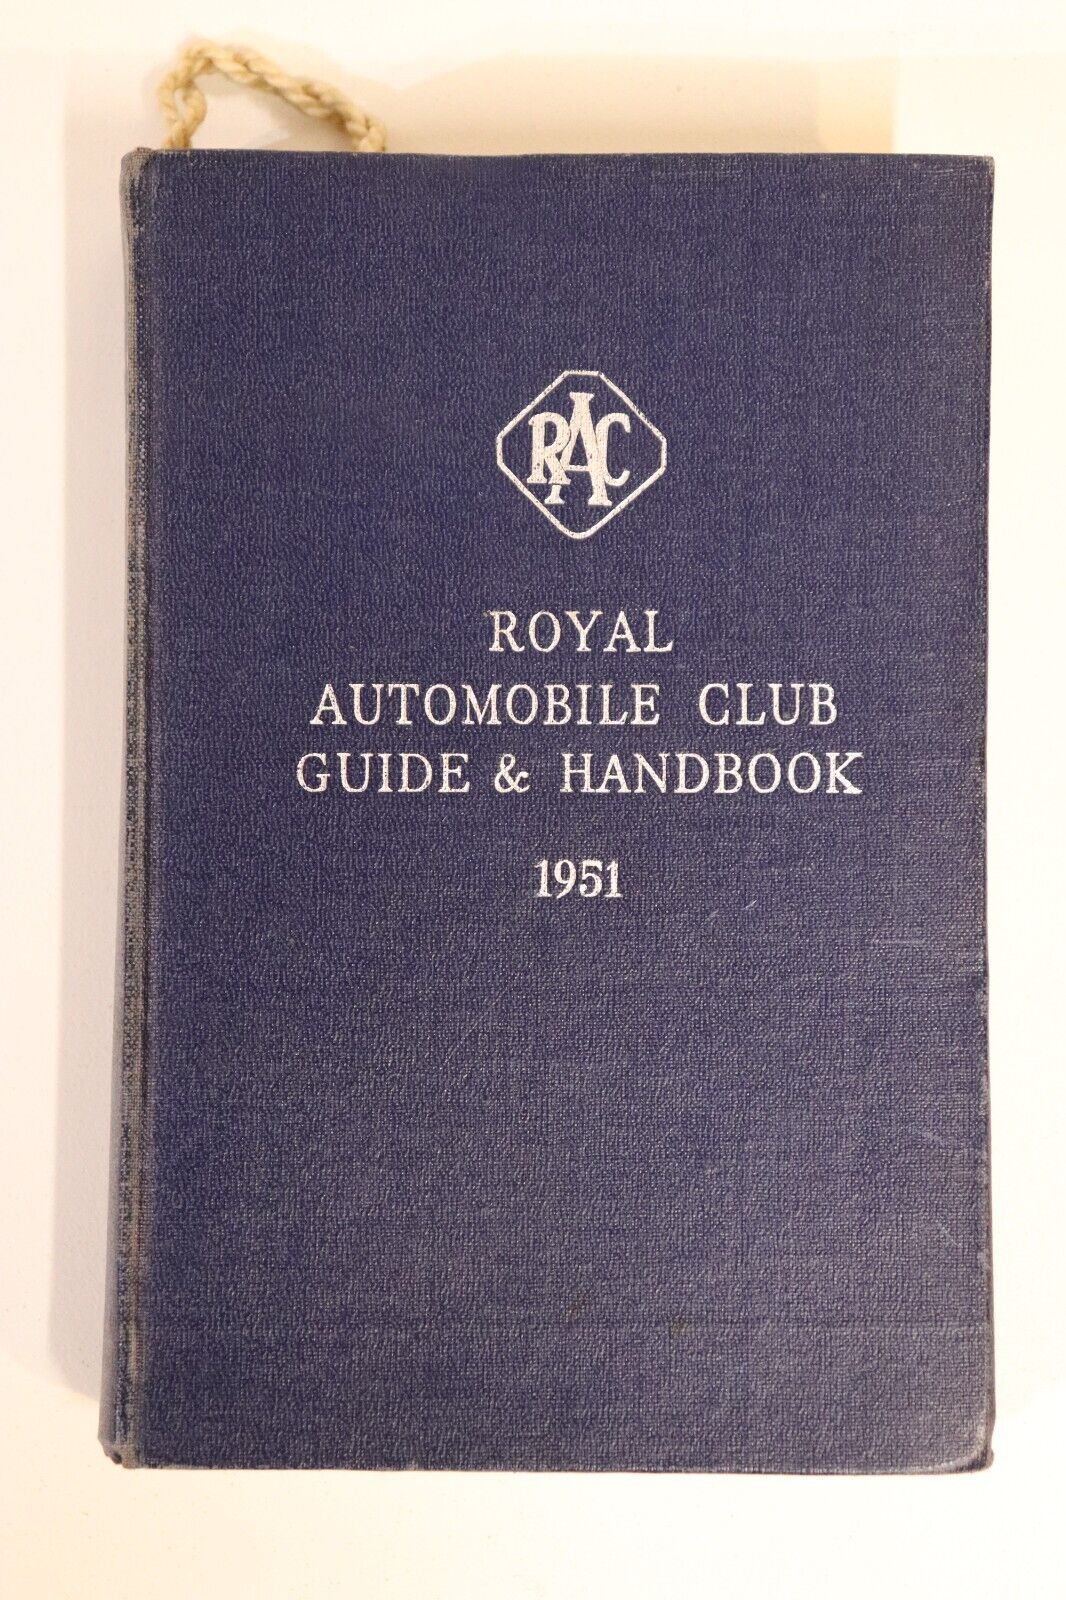 Royal Automobile Club Guide For 1951 - Vintage Motor Travel Guide Book